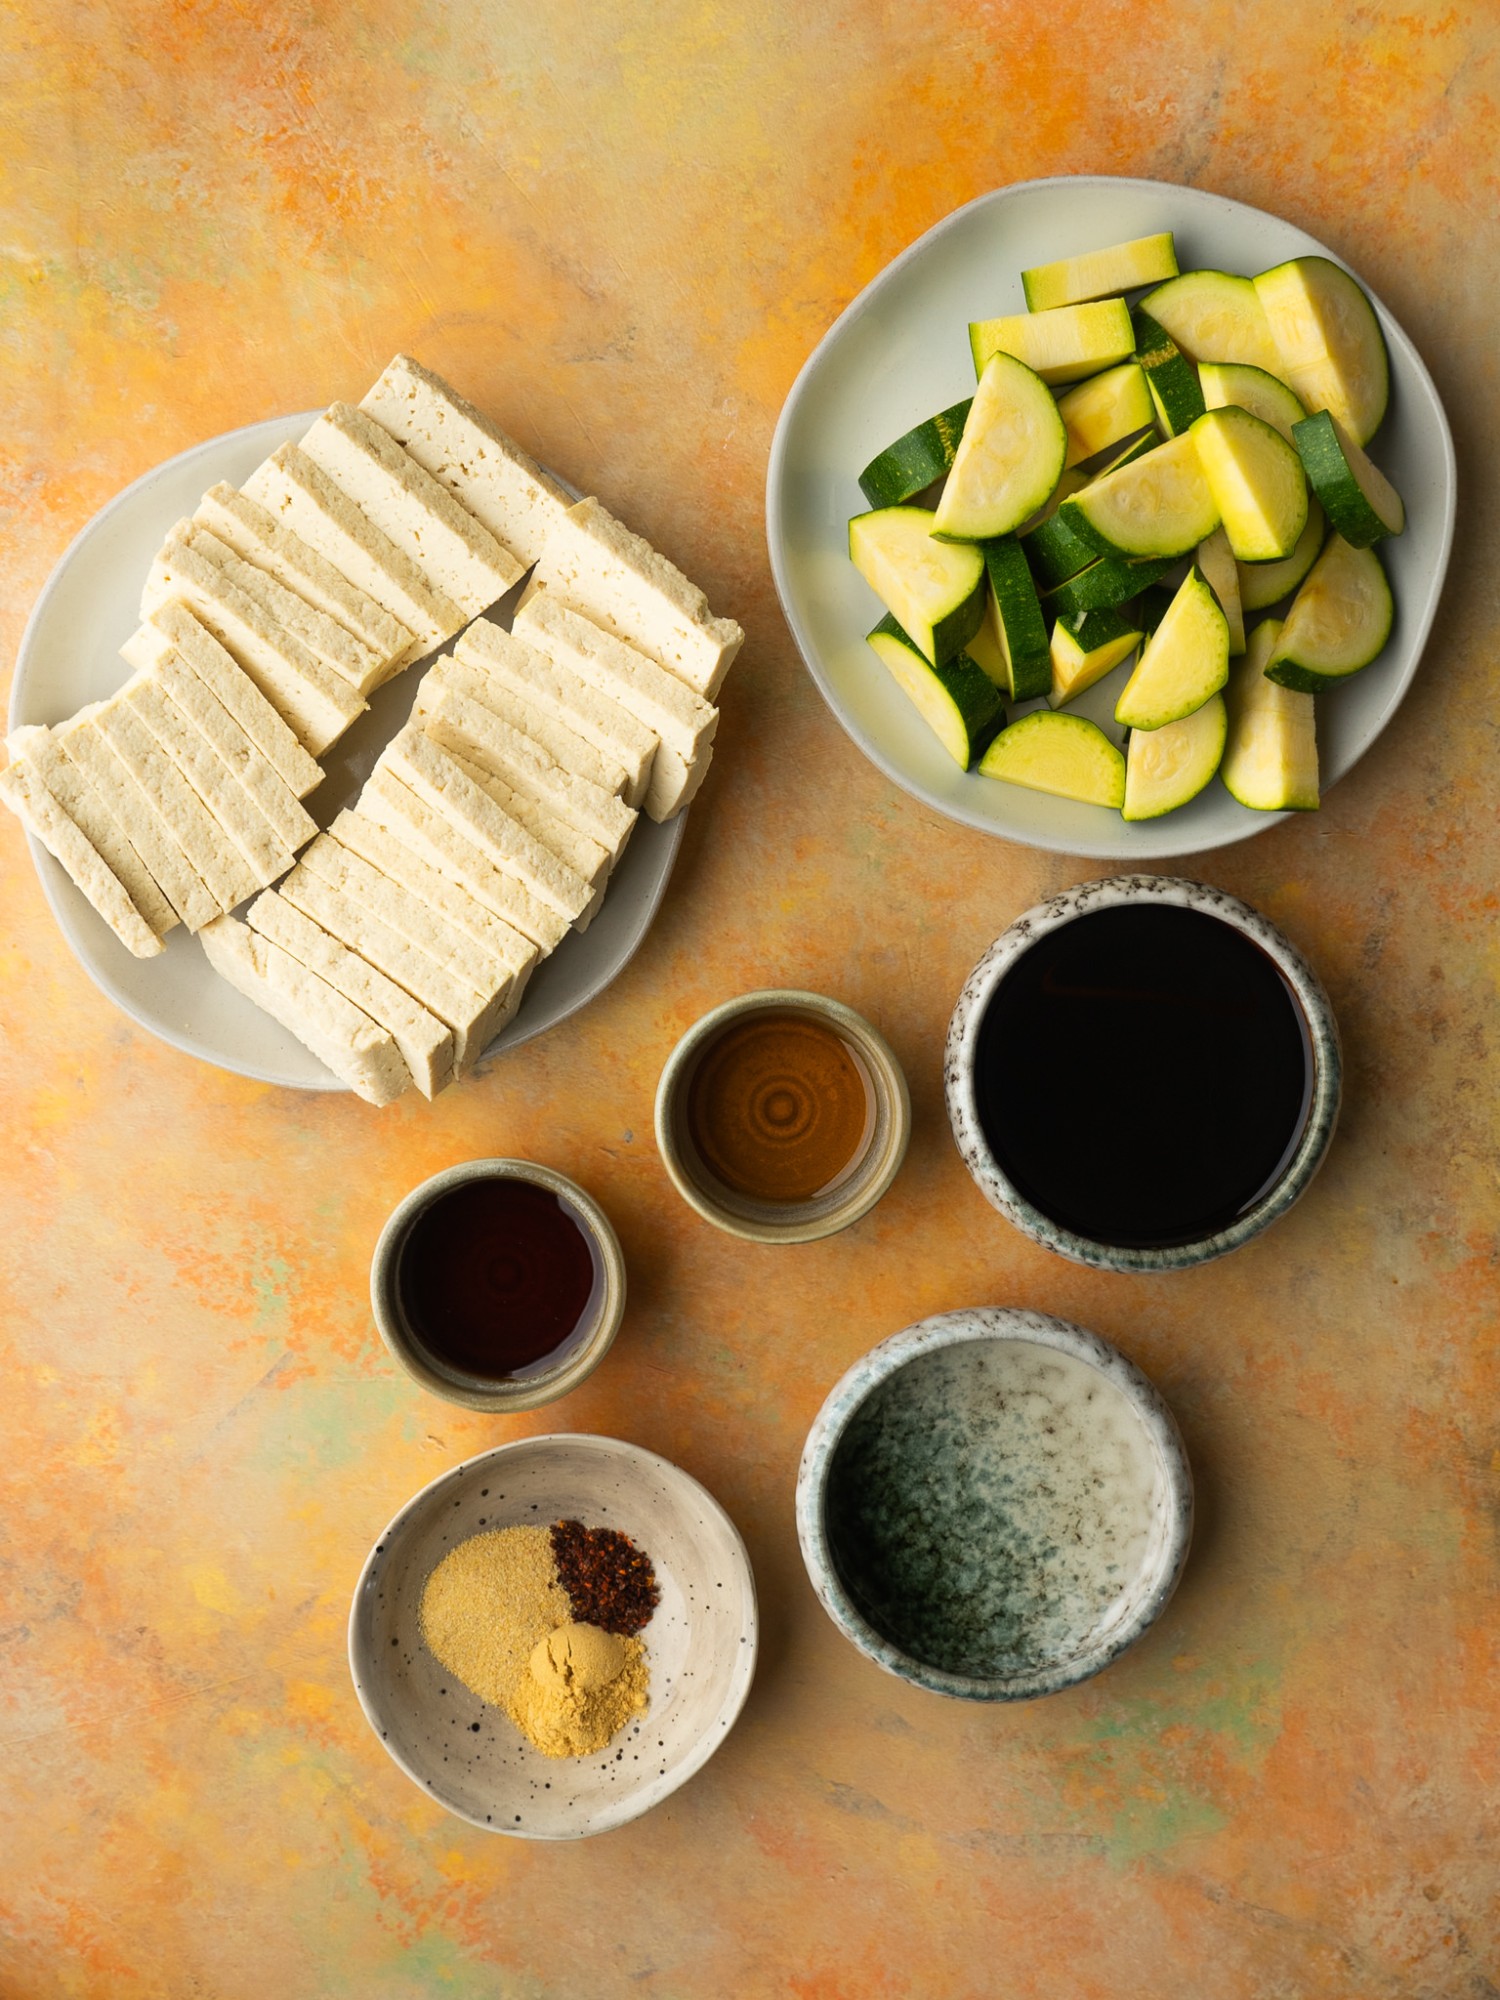 Above view of ingredients for tofu marinade and tofu